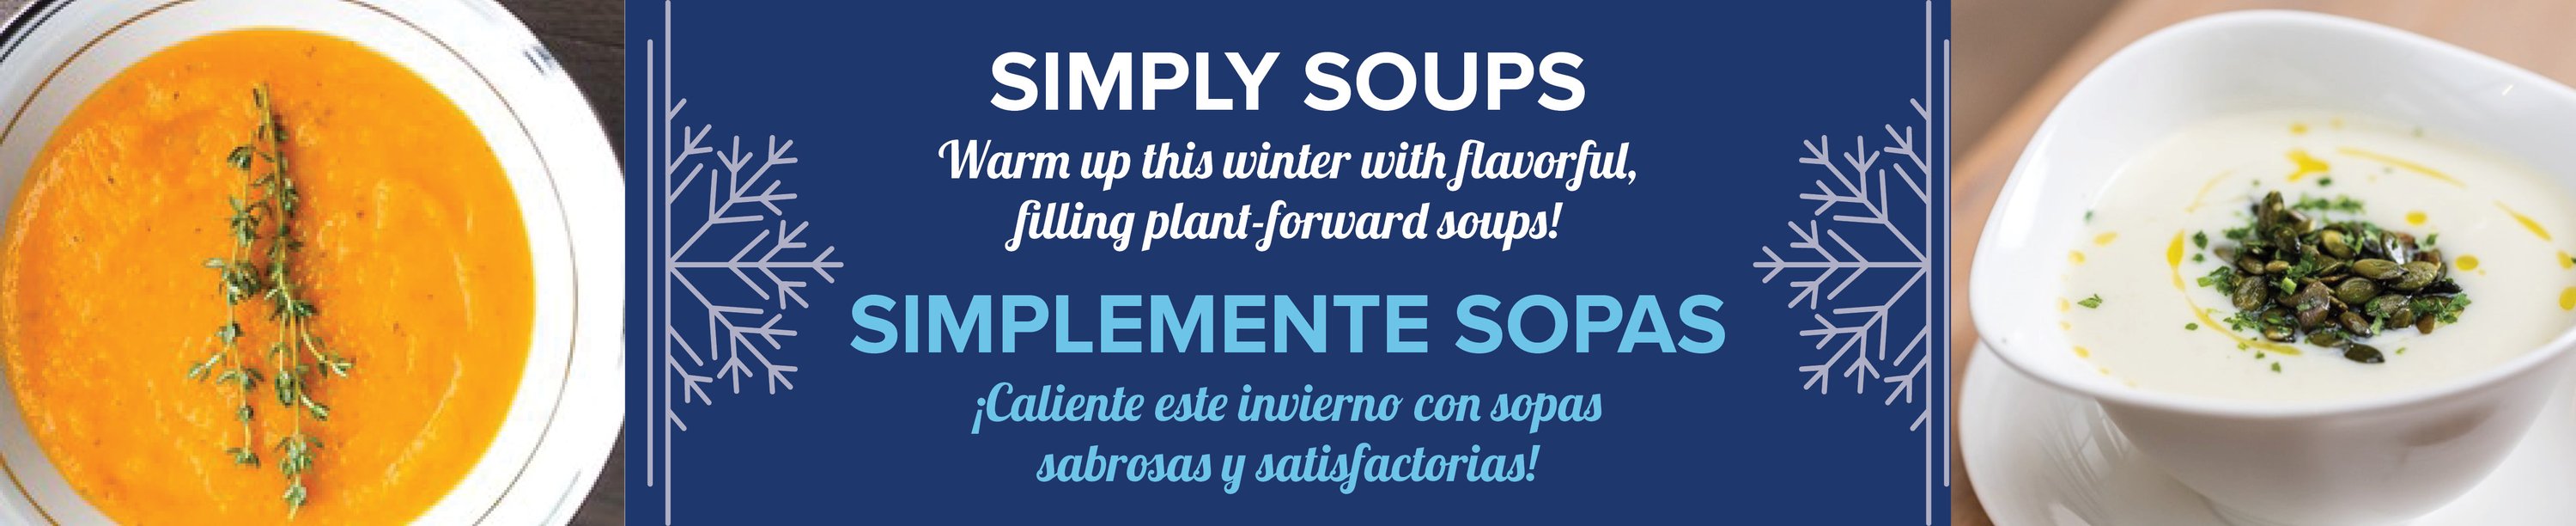 simply_soup_banners